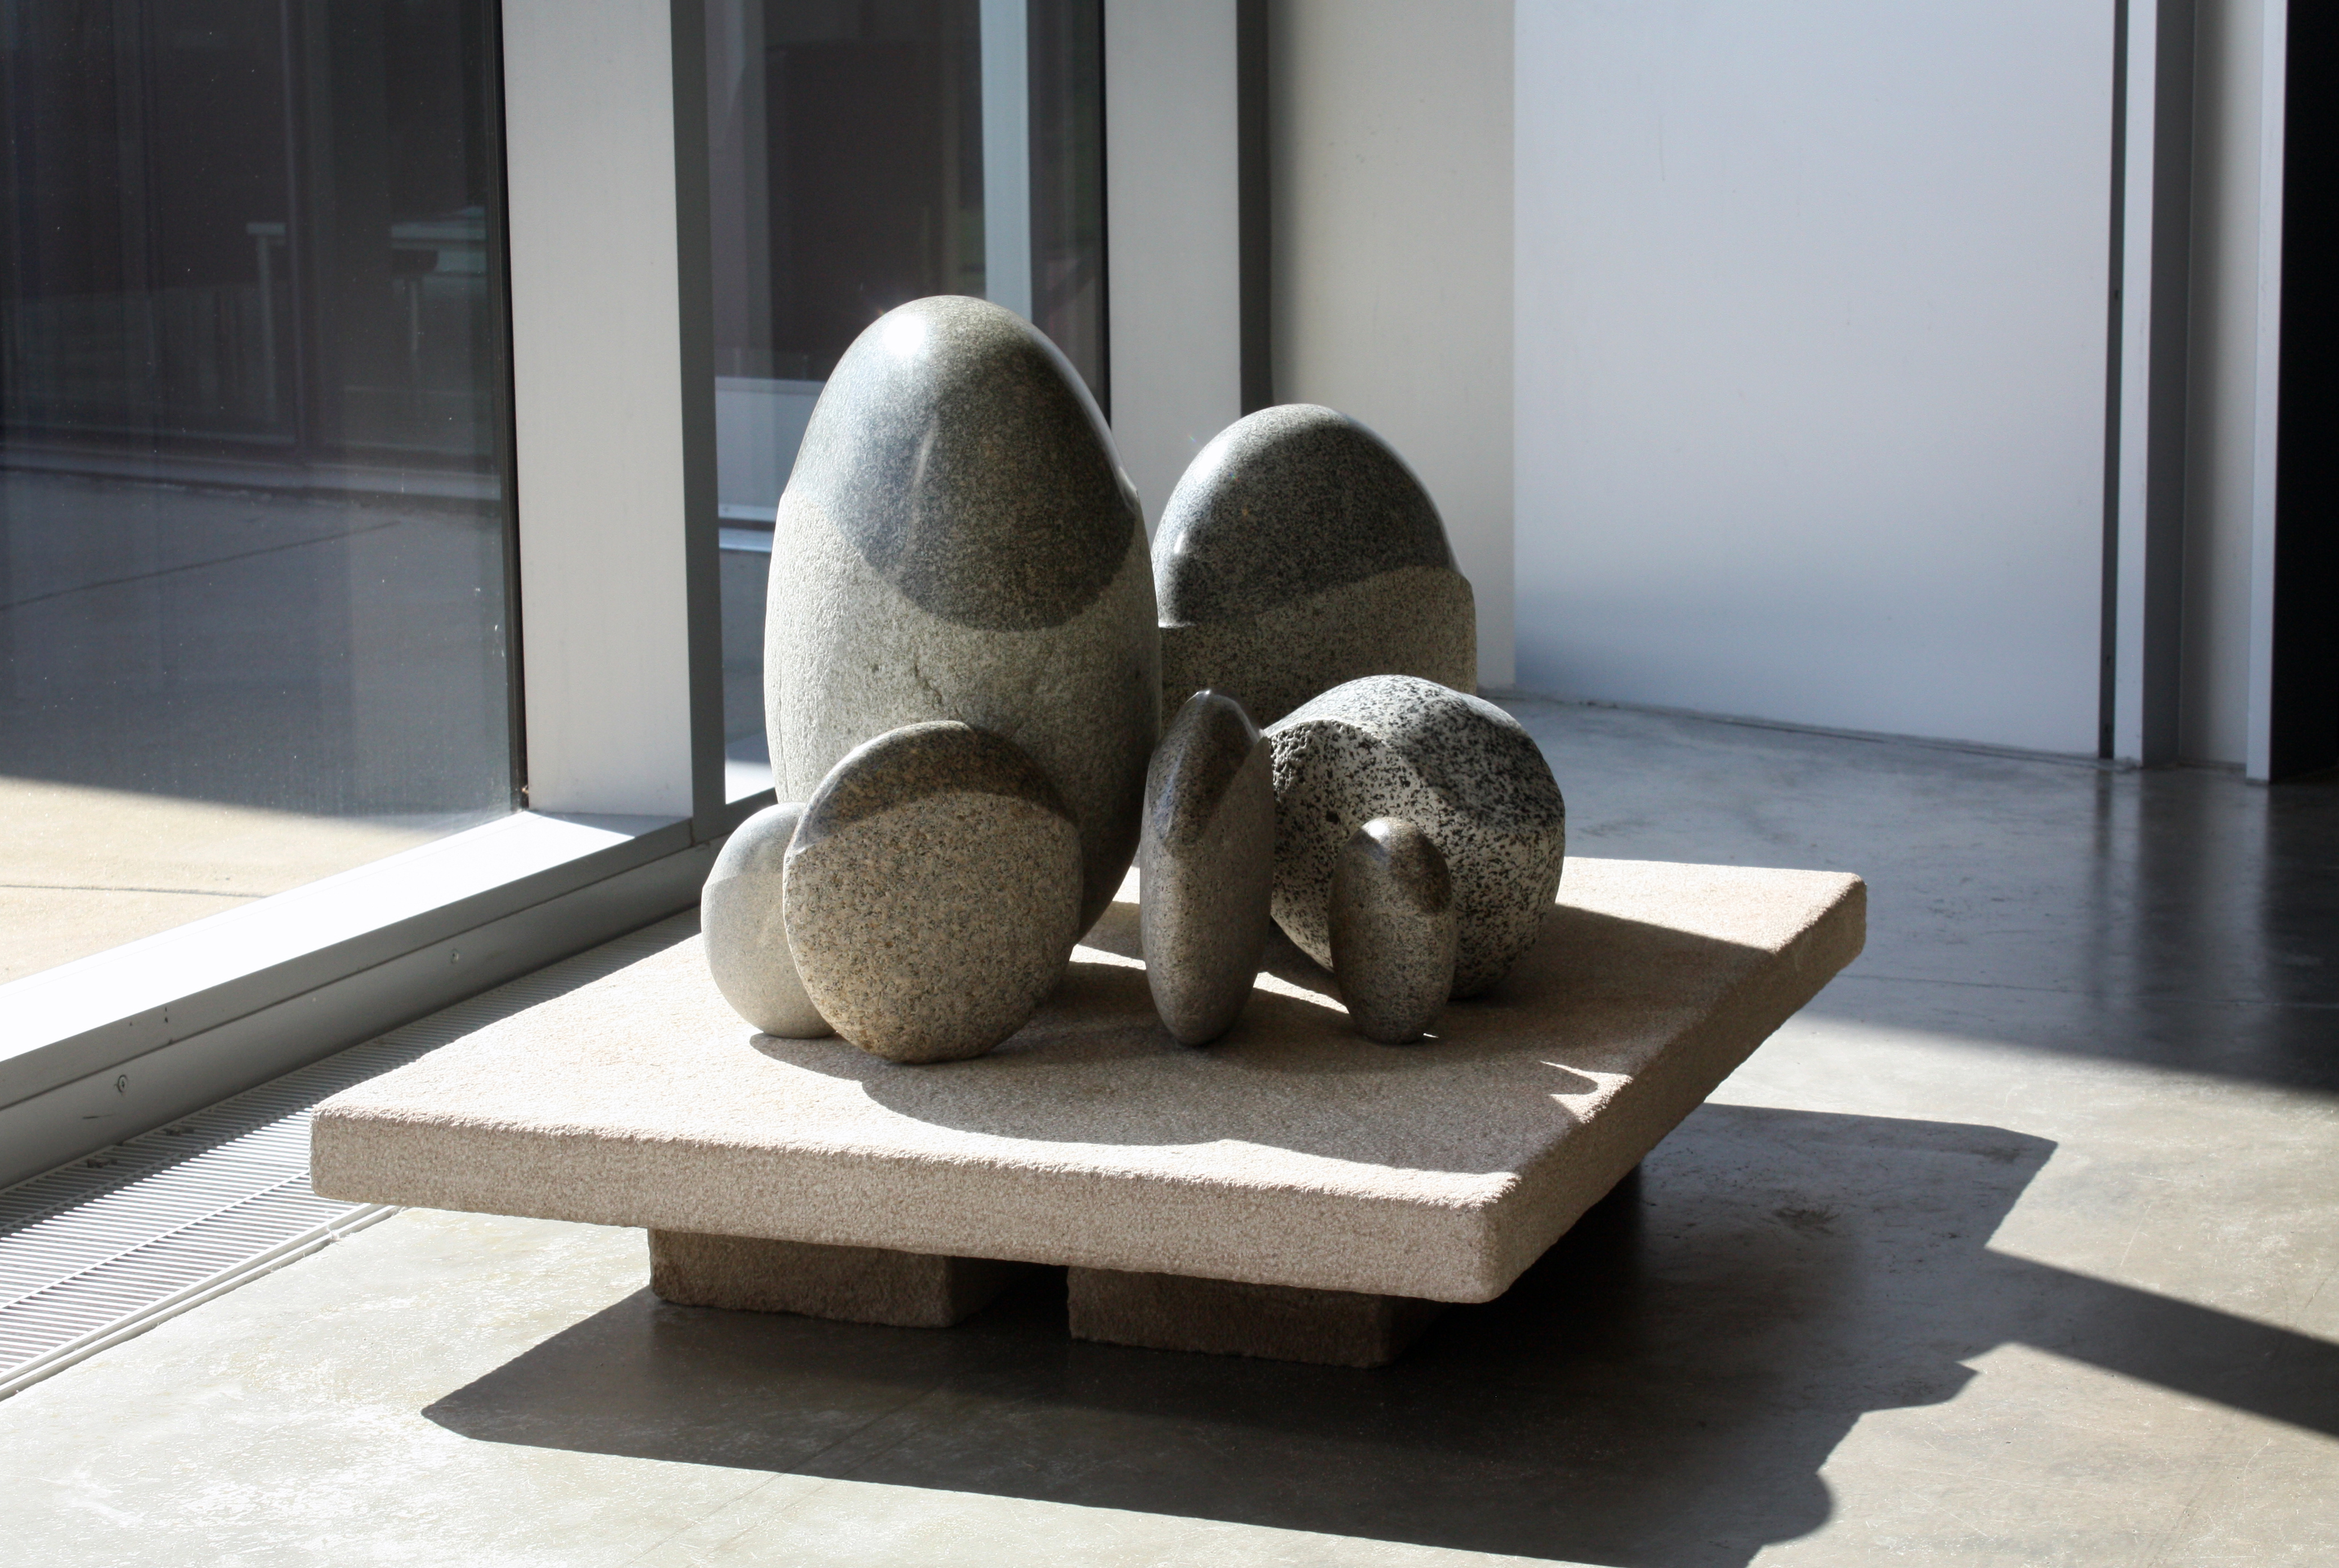 'Tribe of the River and Hills'  - 2012 - 27 x 37 x 24 inches - Skykomish River Granites on Indiana Limestone